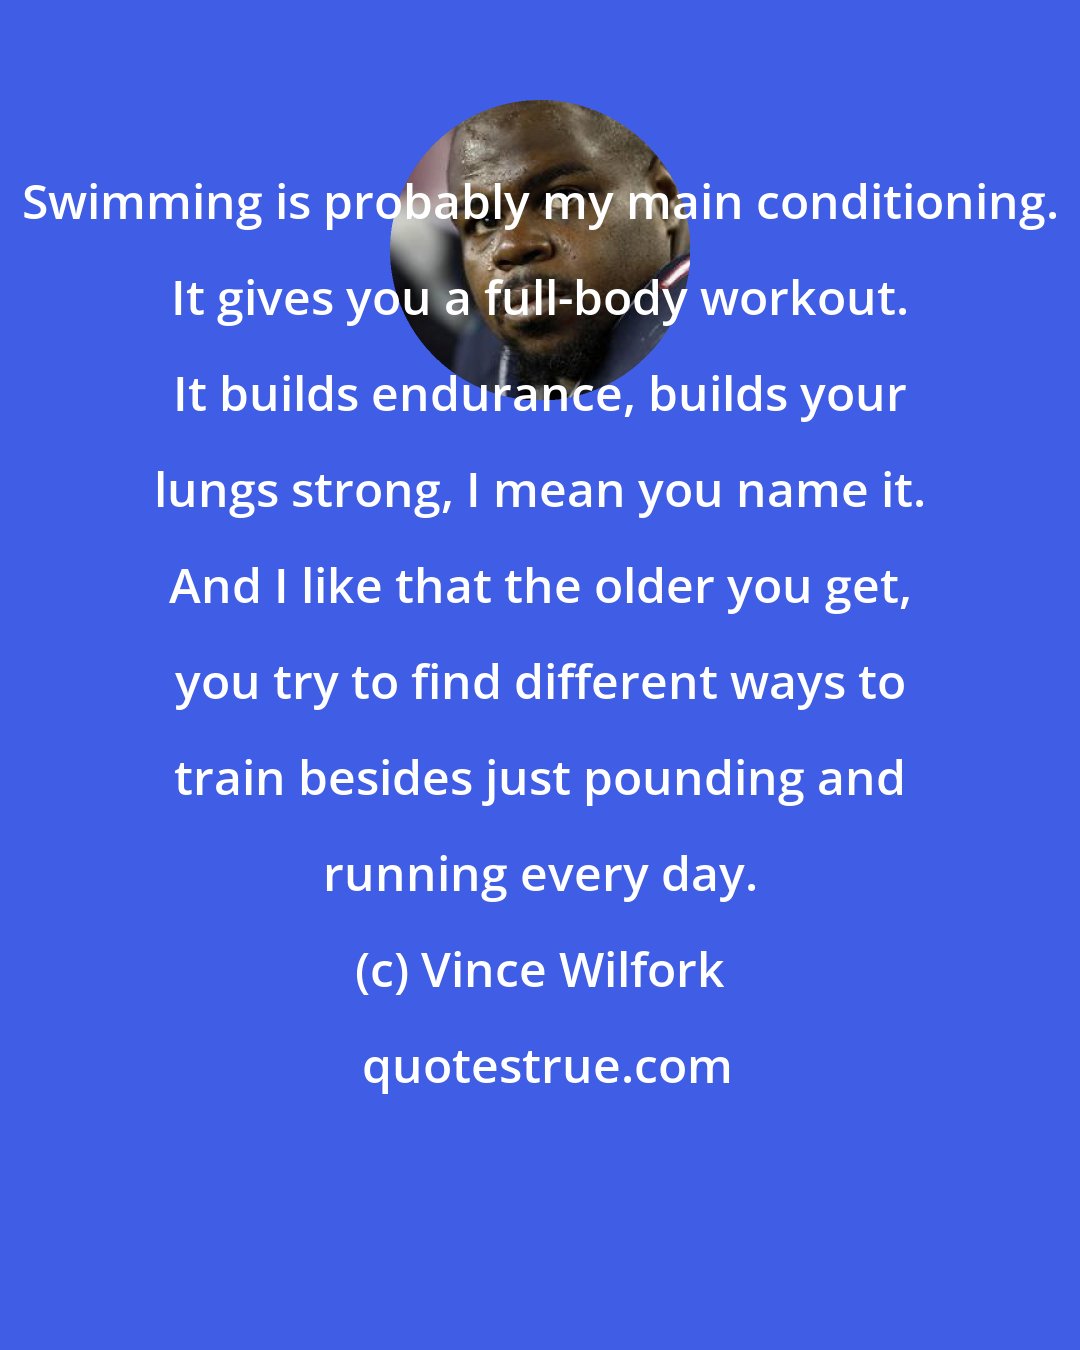 Vince Wilfork: Swimming is probably my main conditioning. It gives you a full-body workout. It builds endurance, builds your lungs strong, I mean you name it. And I like that the older you get, you try to find different ways to train besides just pounding and running every day.